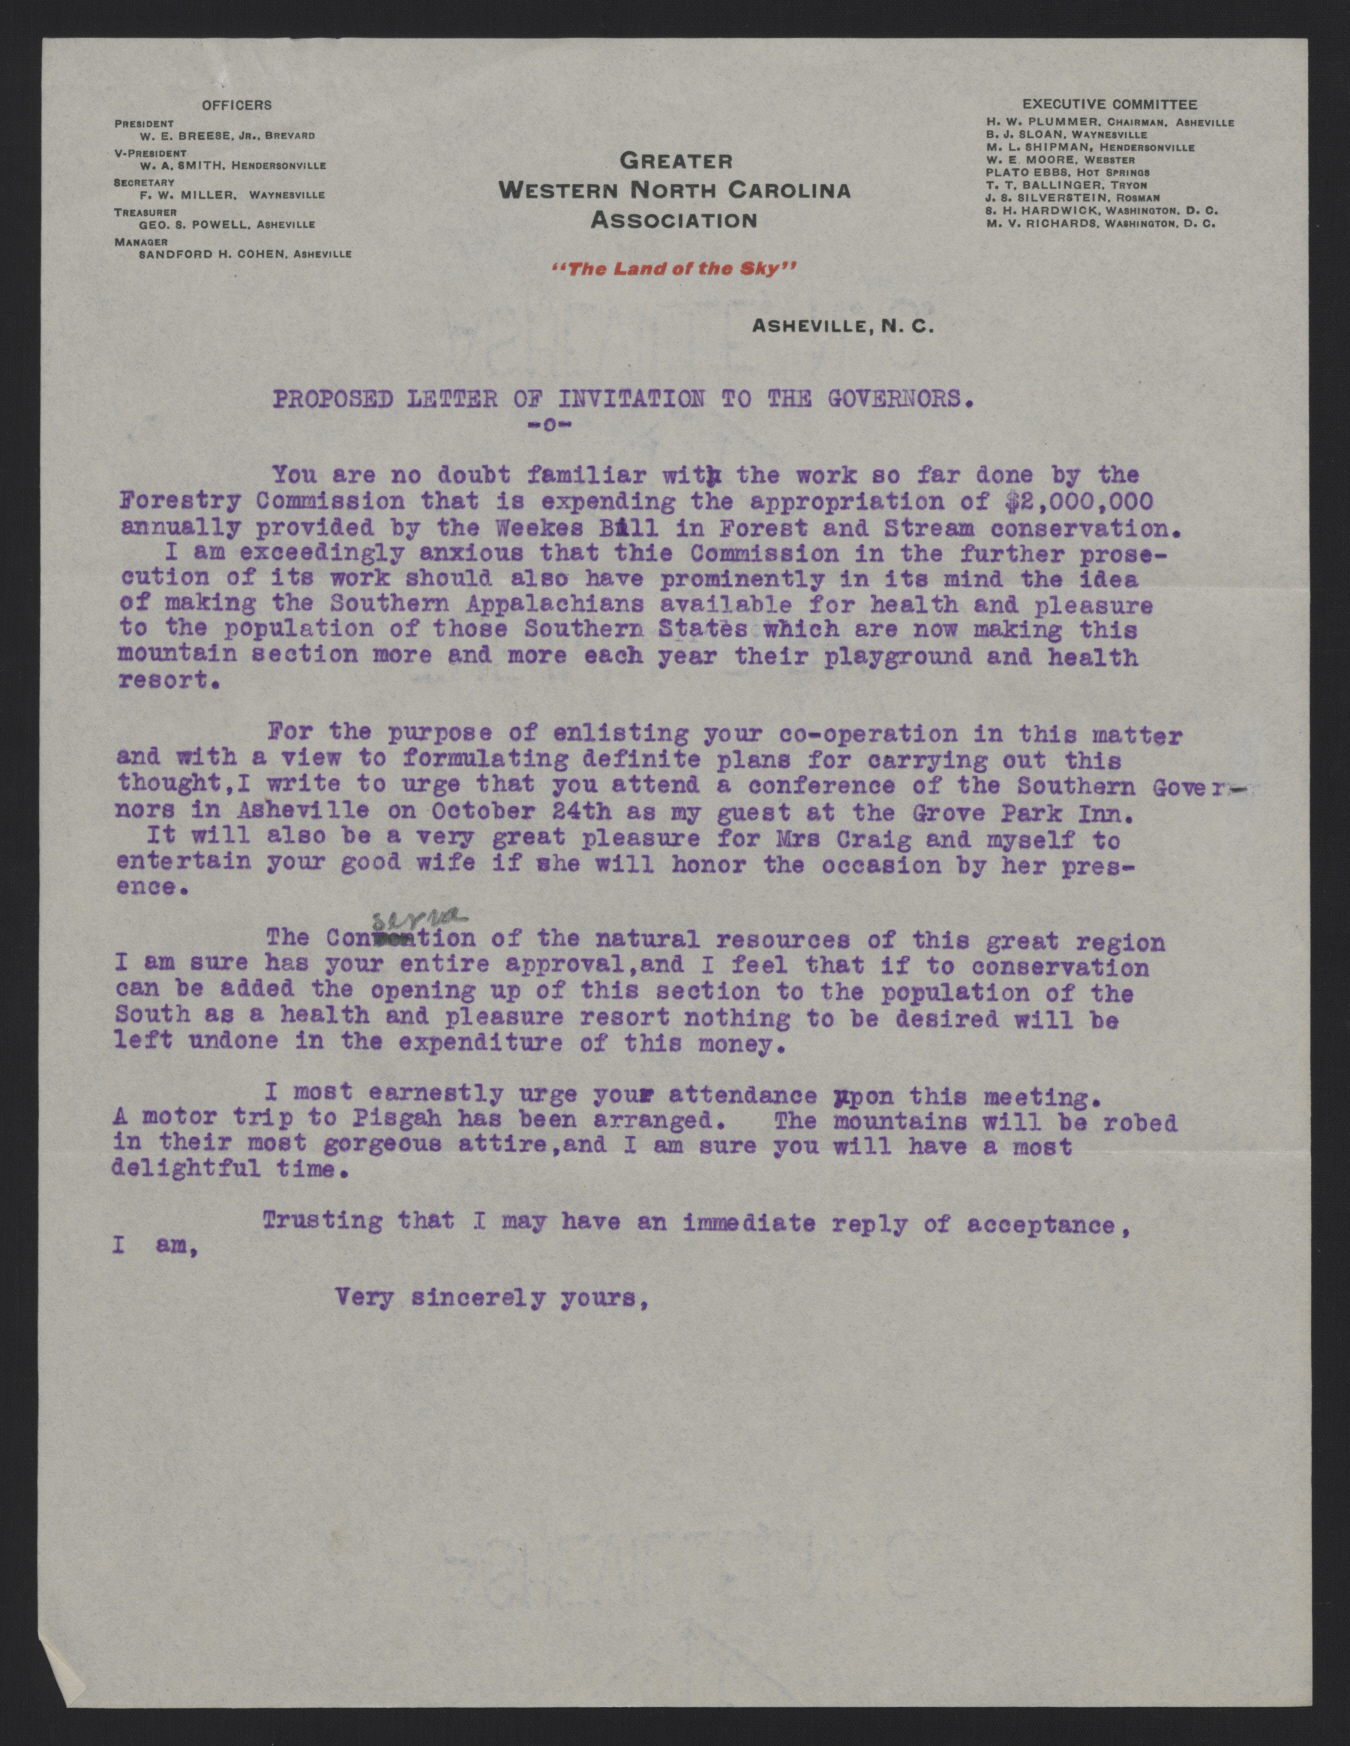 Draft of Proposed Letter of Invitation to Governors by the Greater Western North Carolina Association, circa 13 October 1913